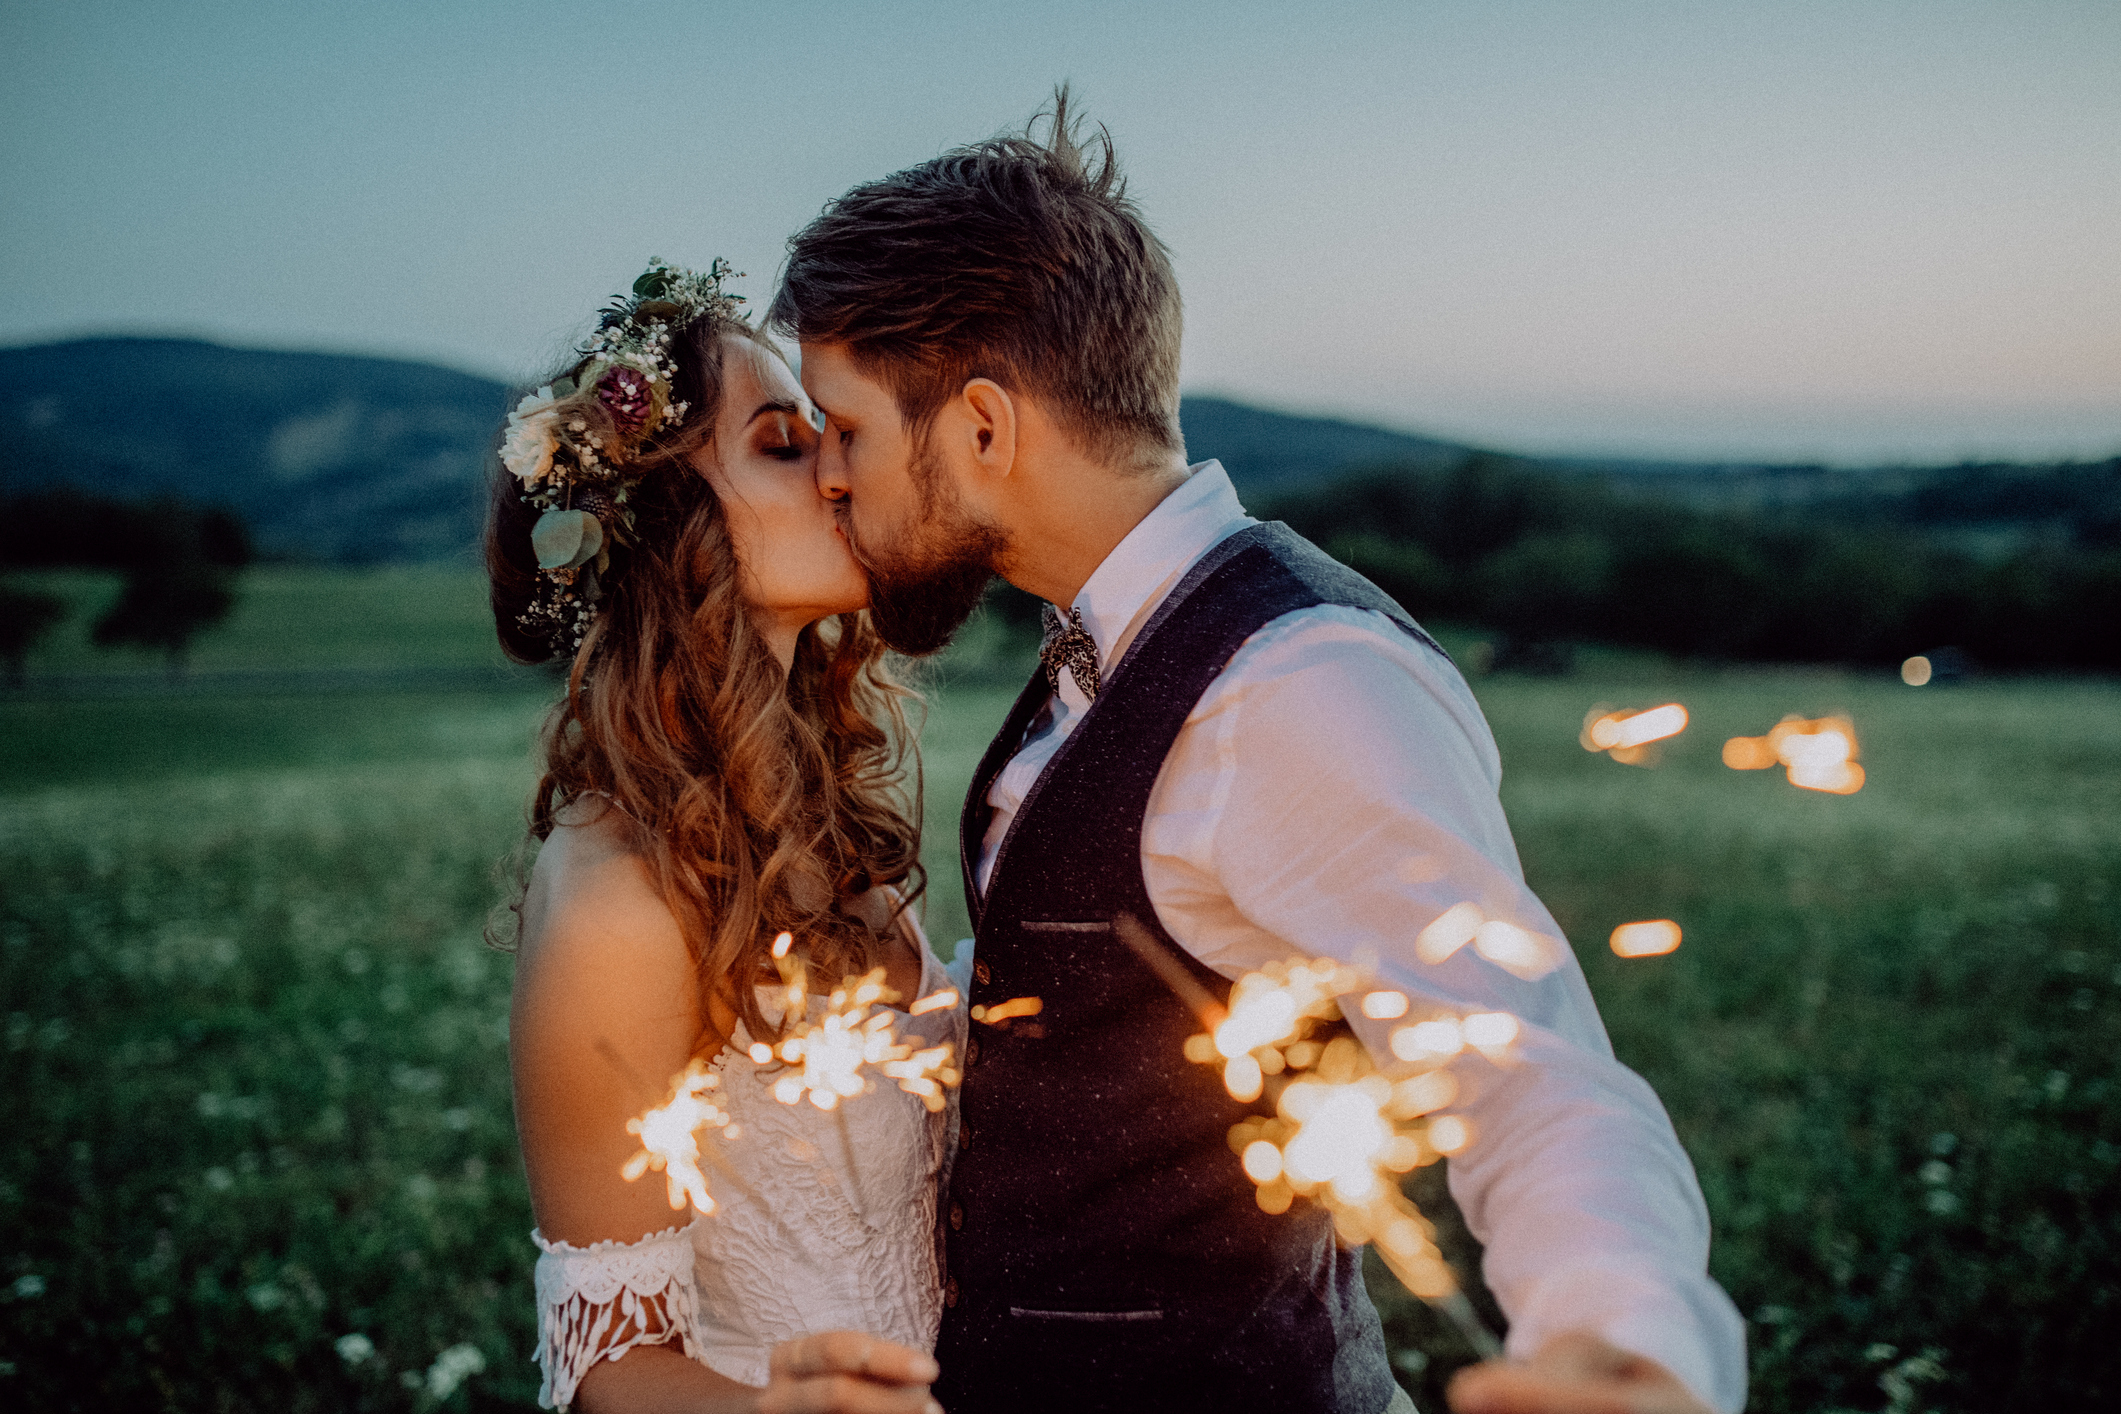 Beautiful young bride and groom on a meadow in the evening, holding sparklers.